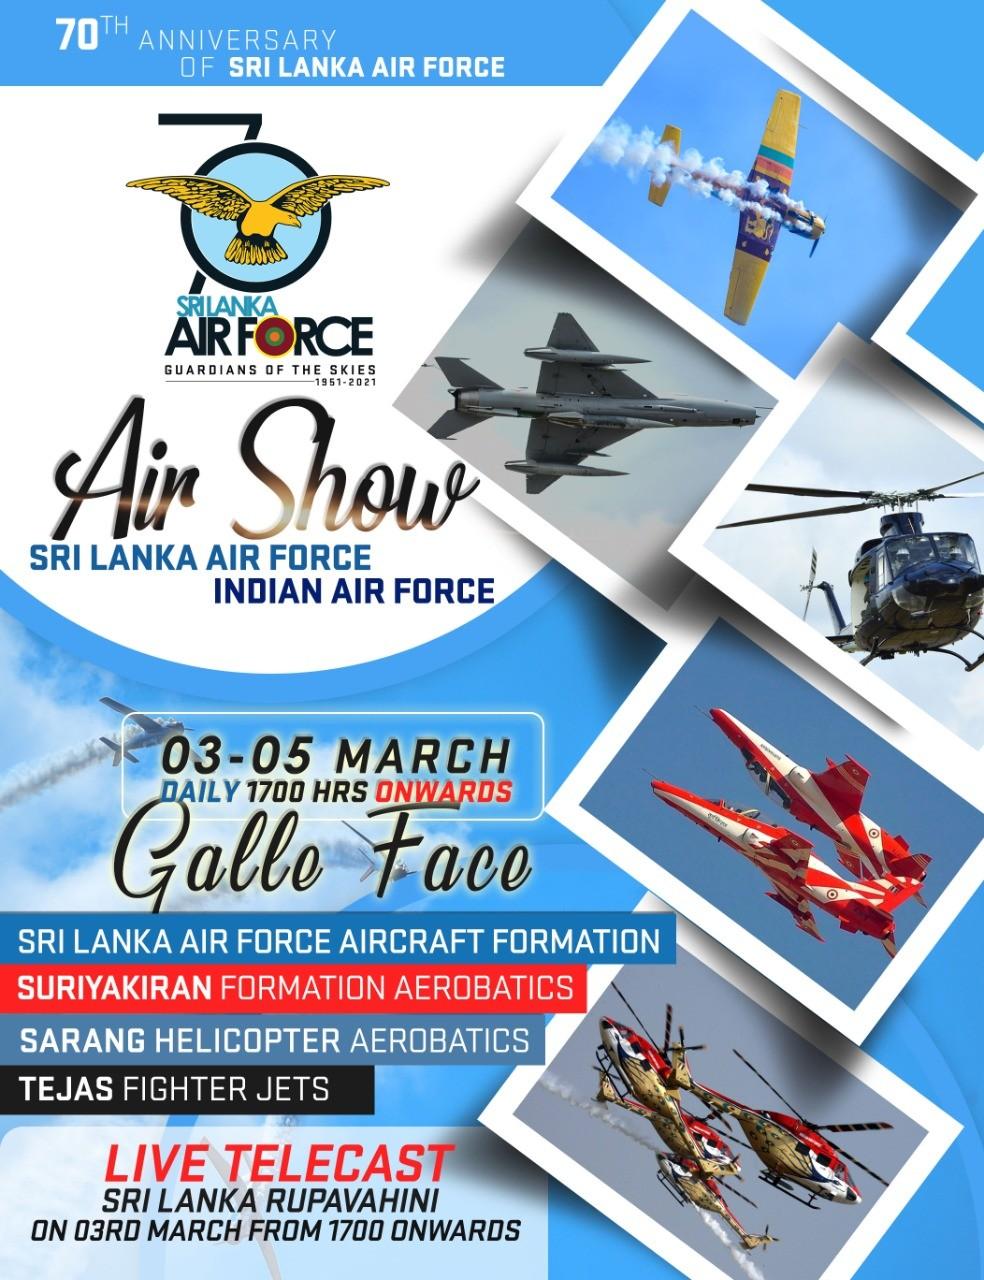 3.The Indian Air Force is participating in the Air Show of Sri Lanka Air Force (SLAF) in 2021.